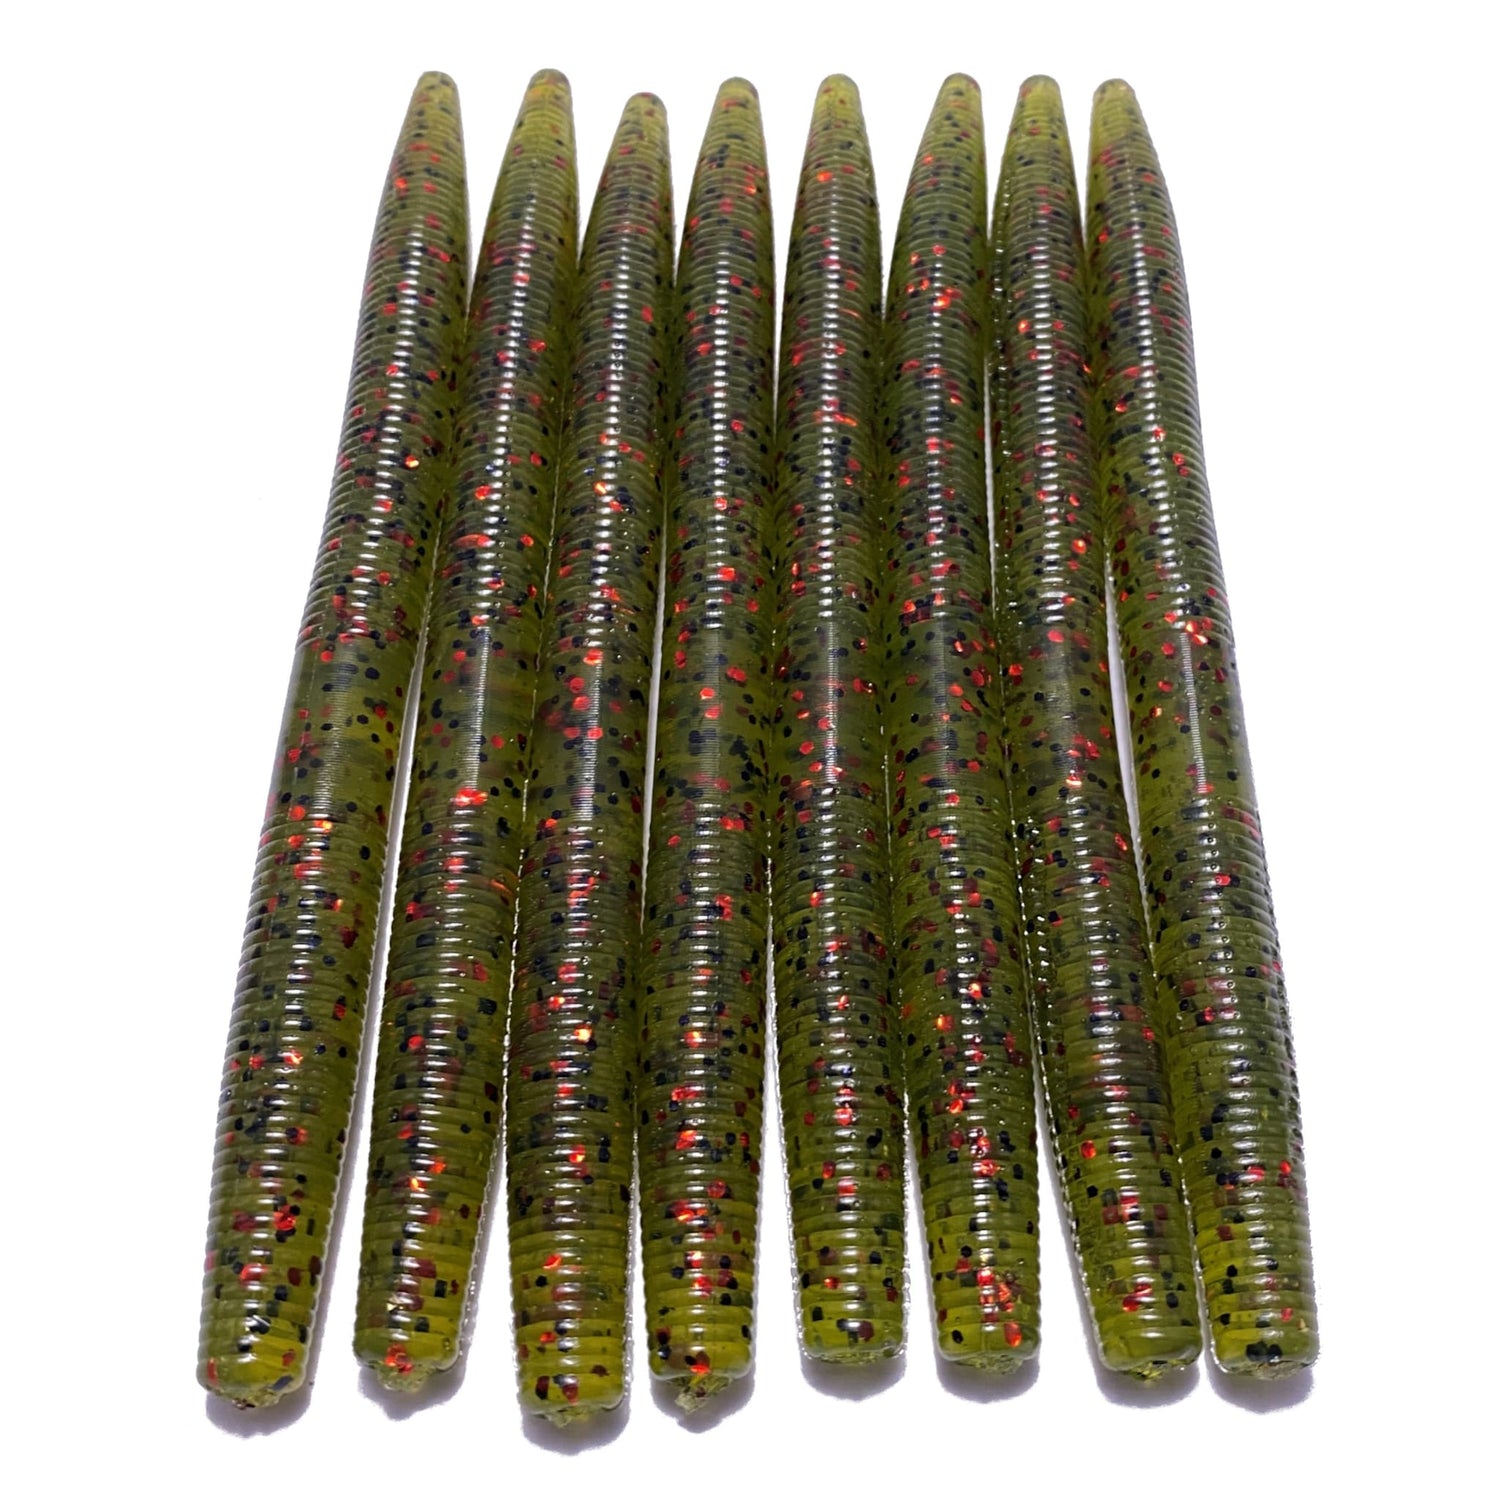 Obee Stick - Watermelon Red - Fishing Baits & Lures